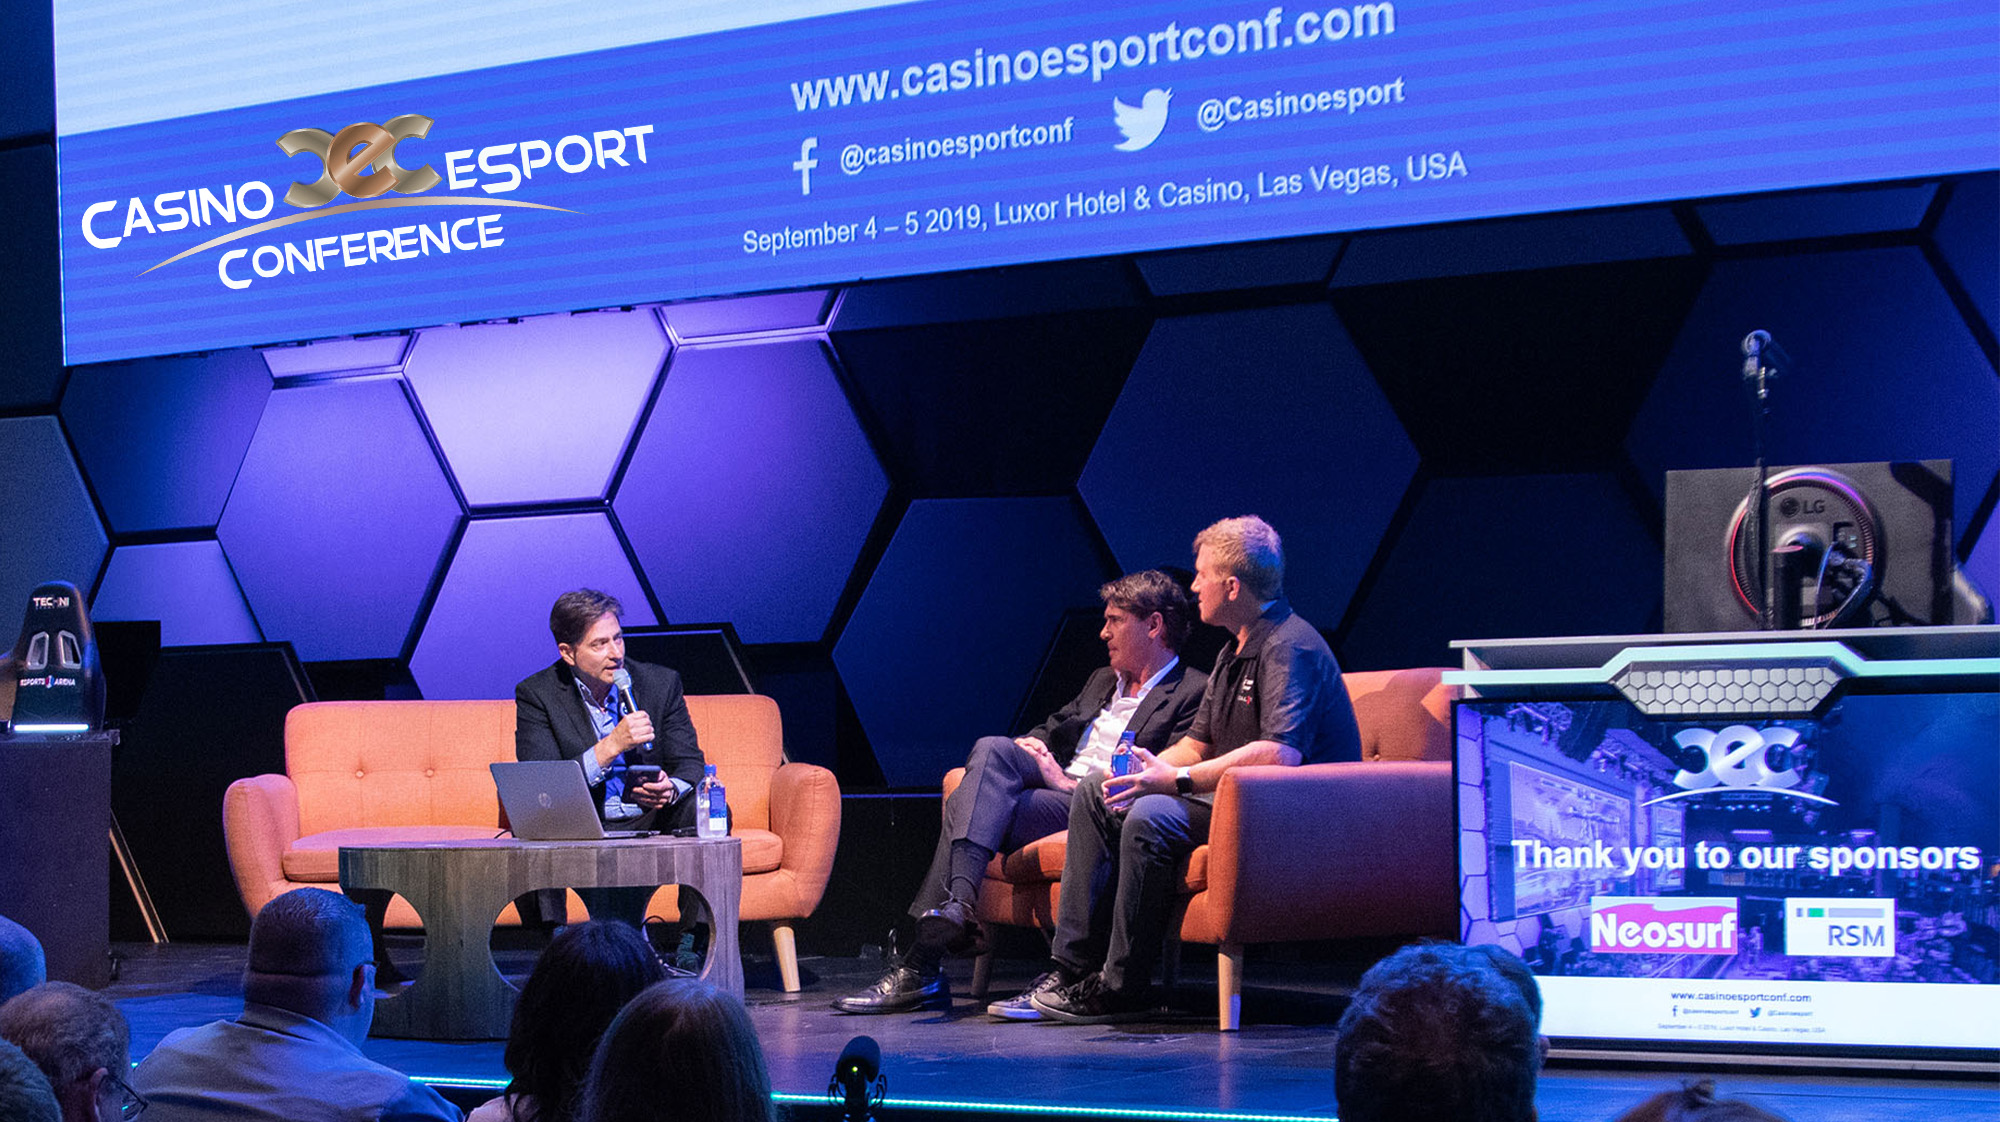 Legal and Regulatory Issues in Esports Are One of the Main Factors in This  Year's Casino Esport Conference - PR.com